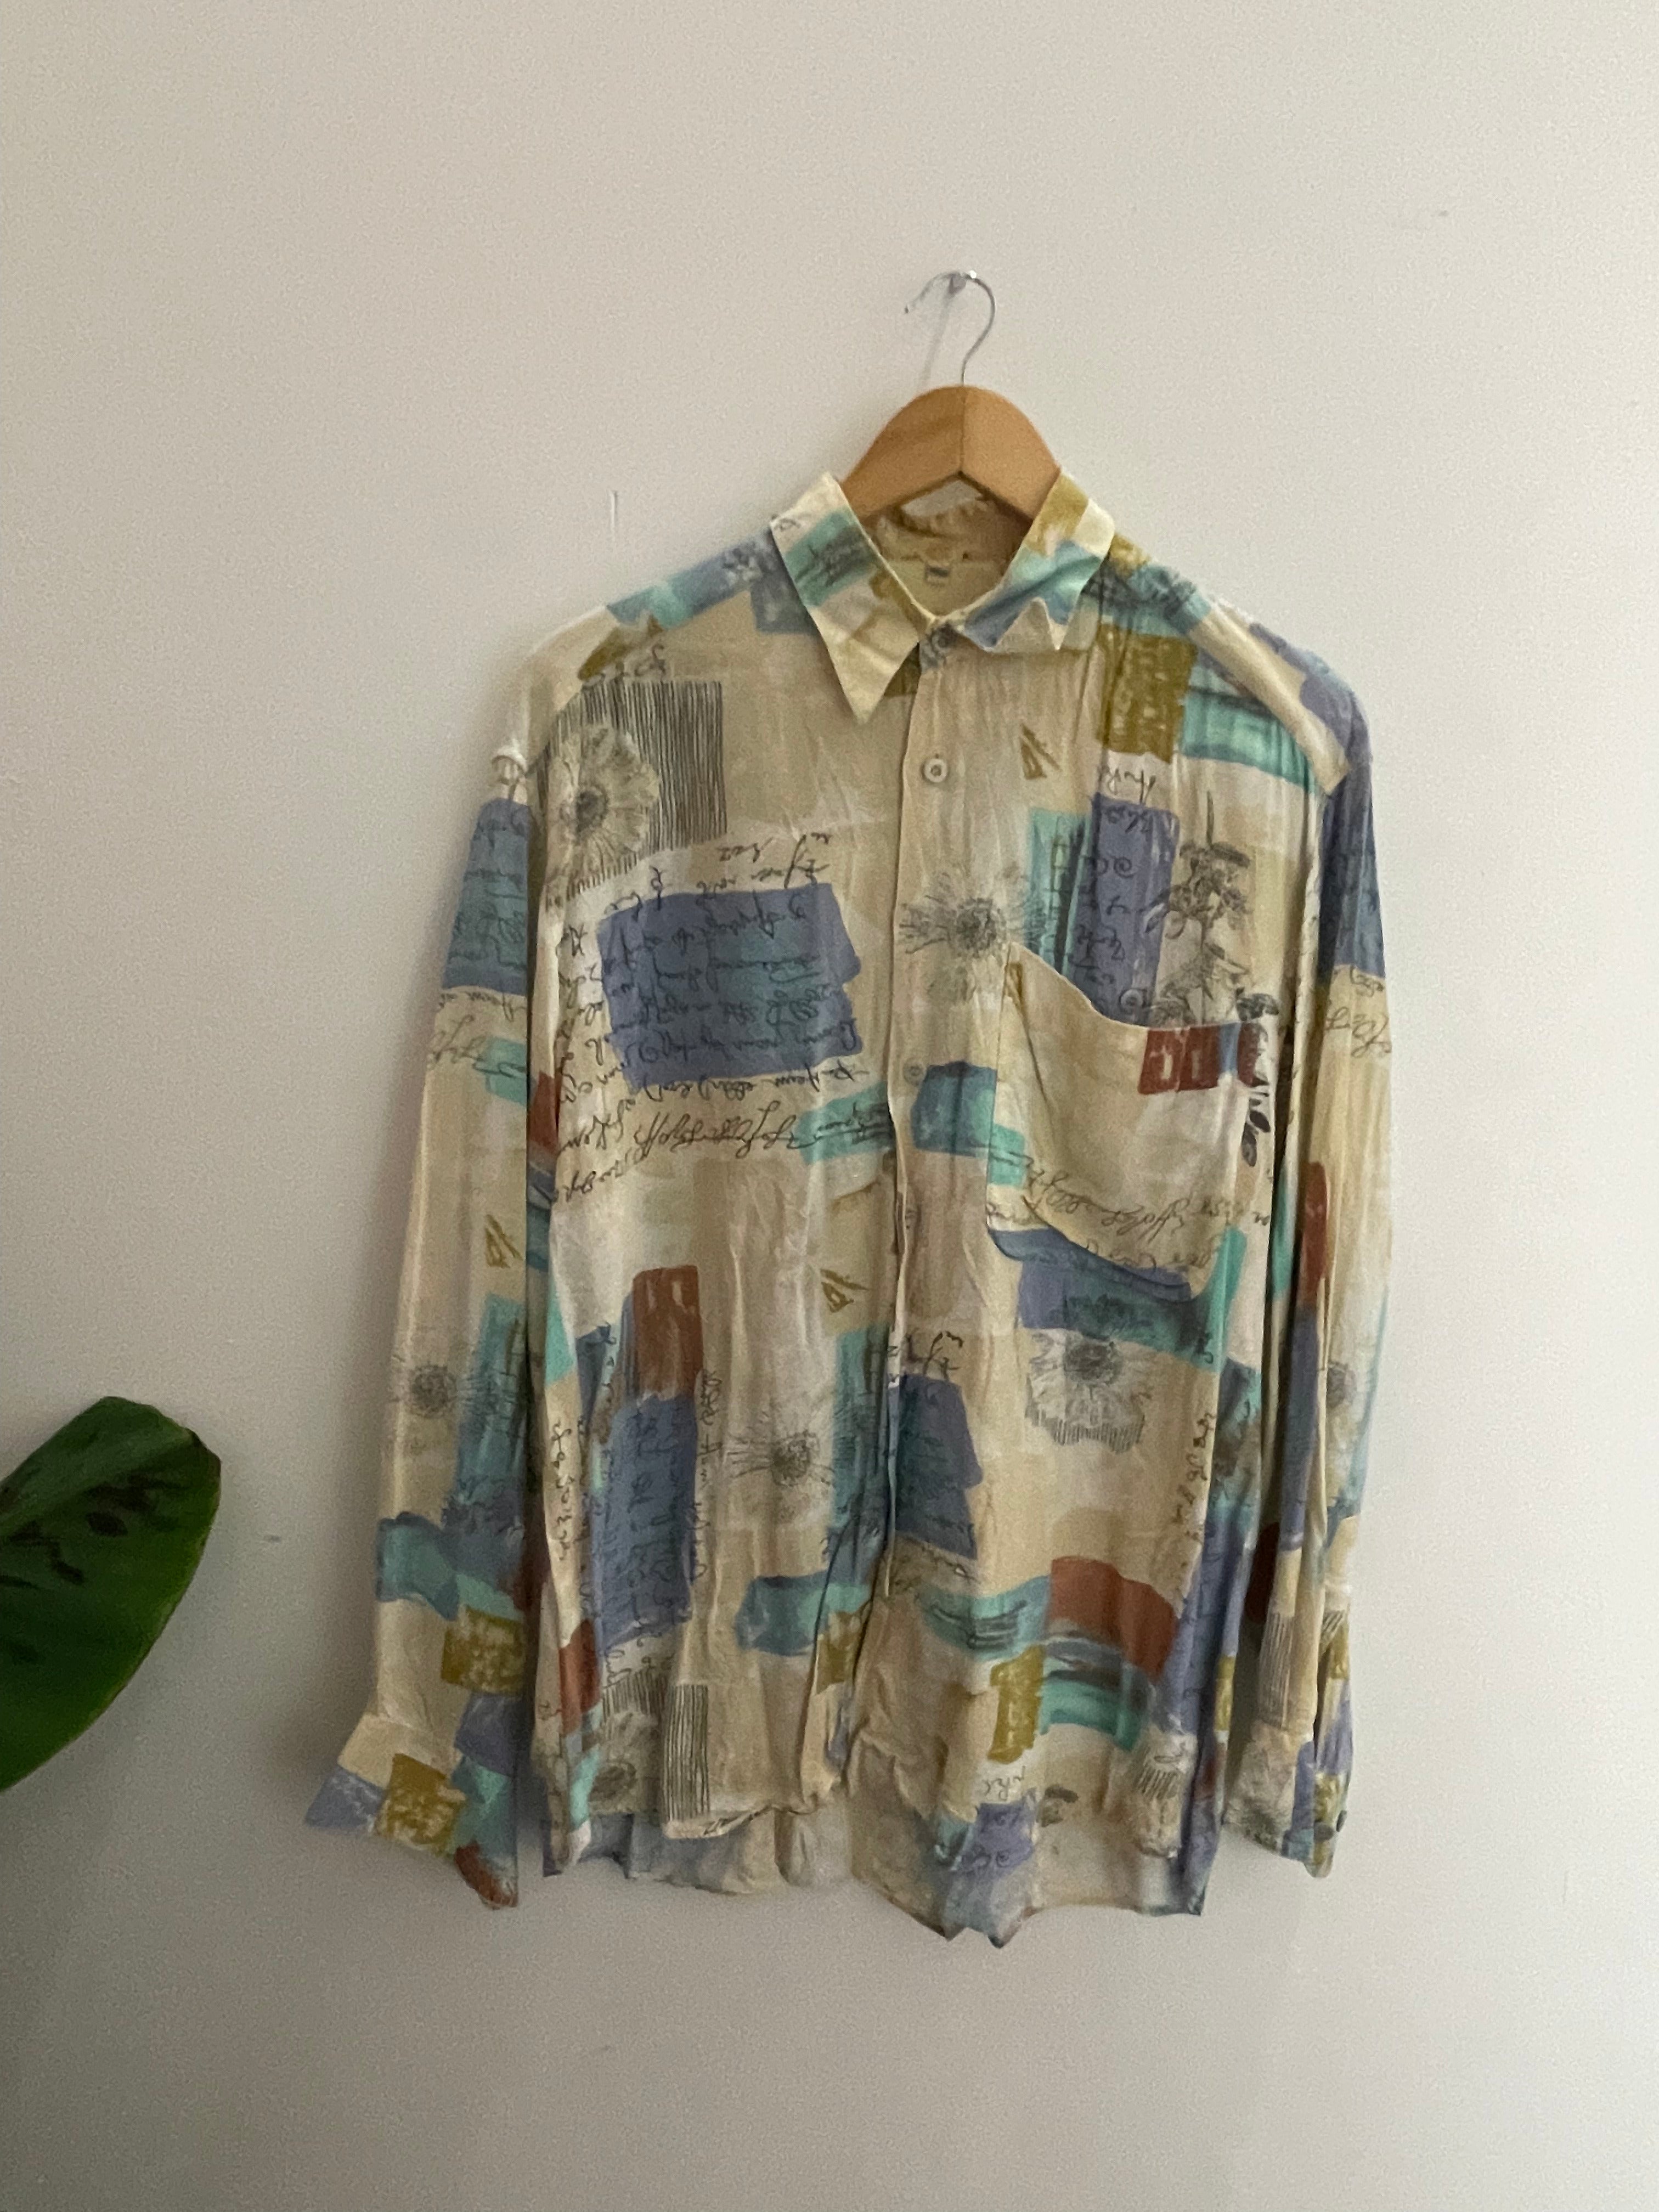 Vintage club d'amingo cream long sleeve abstract pattern shirt size M